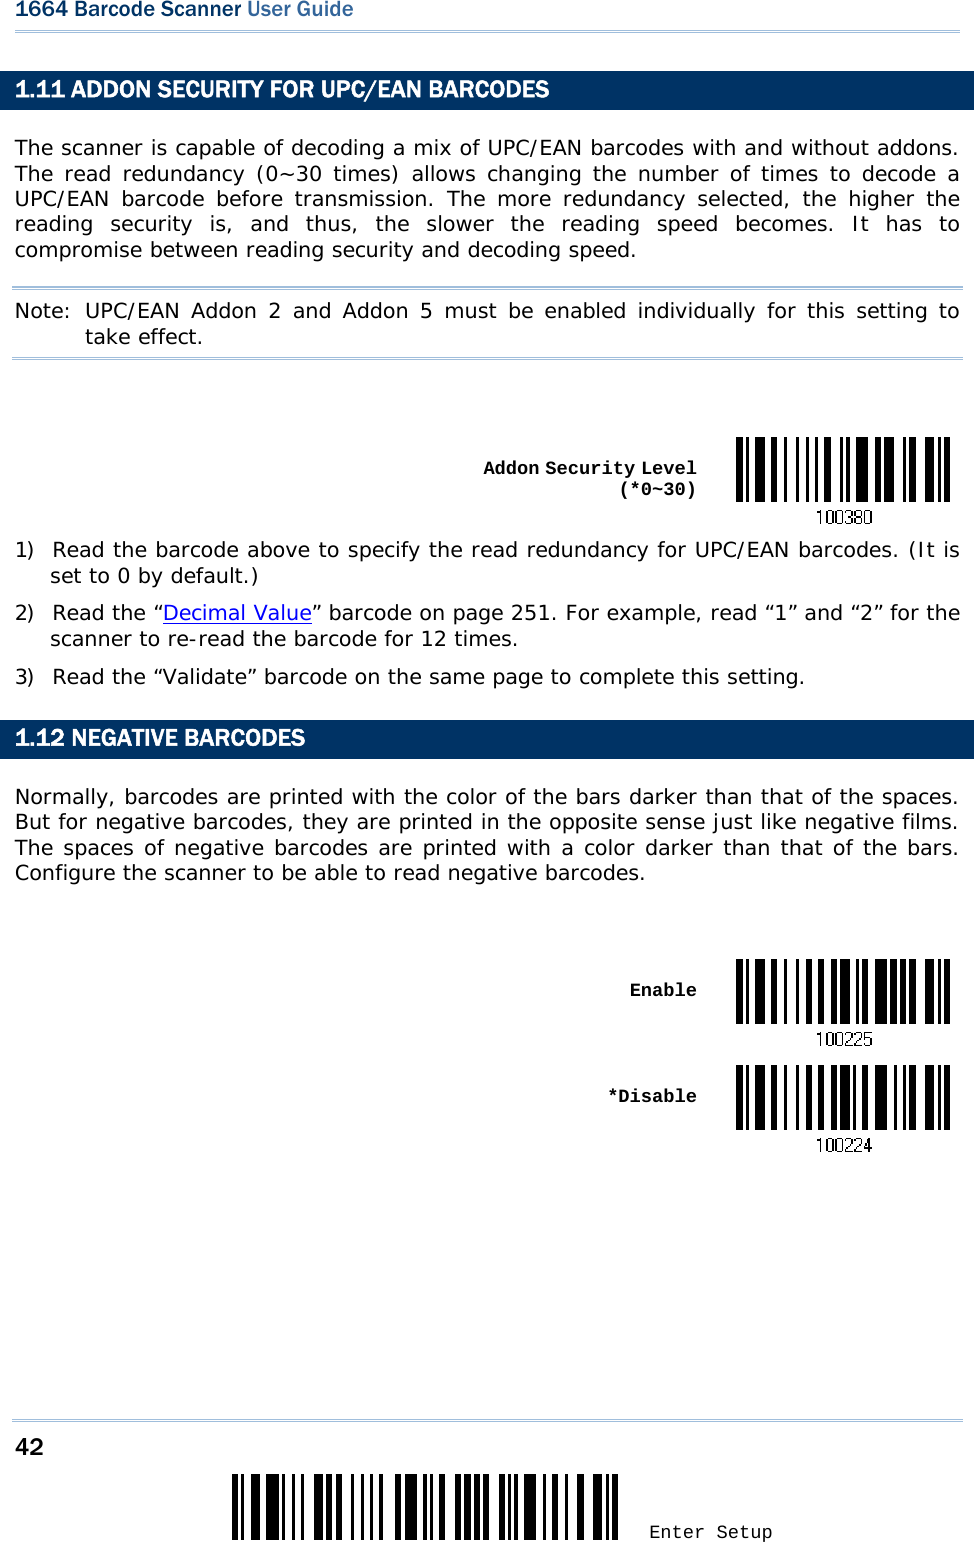 42 Enter Setup 1664 Barcode Scanner User Guide  1.11 ADDON SECURITY FOR UPC/EAN BARCODES The scanner is capable of decoding a mix of UPC/EAN barcodes with and without addons. The read redundancy (0~30 times) allows changing the number of times to decode a UPC/EAN barcode before transmission. The more redundancy selected, the higher the reading security is, and thus, the slower the reading speed becomes. It has to compromise between reading security and decoding speed. Note: UPC/EAN Addon 2 and Addon 5 must be enabled individually for this setting to take effect.    Addon Security Level (*0~30)1) Read the barcode above to specify the read redundancy for UPC/EAN barcodes. (It is set to 0 by default.)       2) Read the “Decimal Value” barcode on page 251. For example, read “1” and “2” for the scanner to re-read the barcode for 12 times.  3) Read the “Validate” barcode on the same page to complete this setting. 1.12 NEGATIVE BARCODES Normally, barcodes are printed with the color of the bars darker than that of the spaces. But for negative barcodes, they are printed in the opposite sense just like negative films. The spaces of negative barcodes are printed with a color darker than that of the bars. Configure the scanner to be able to read negative barcodes.   Enable *Disable  